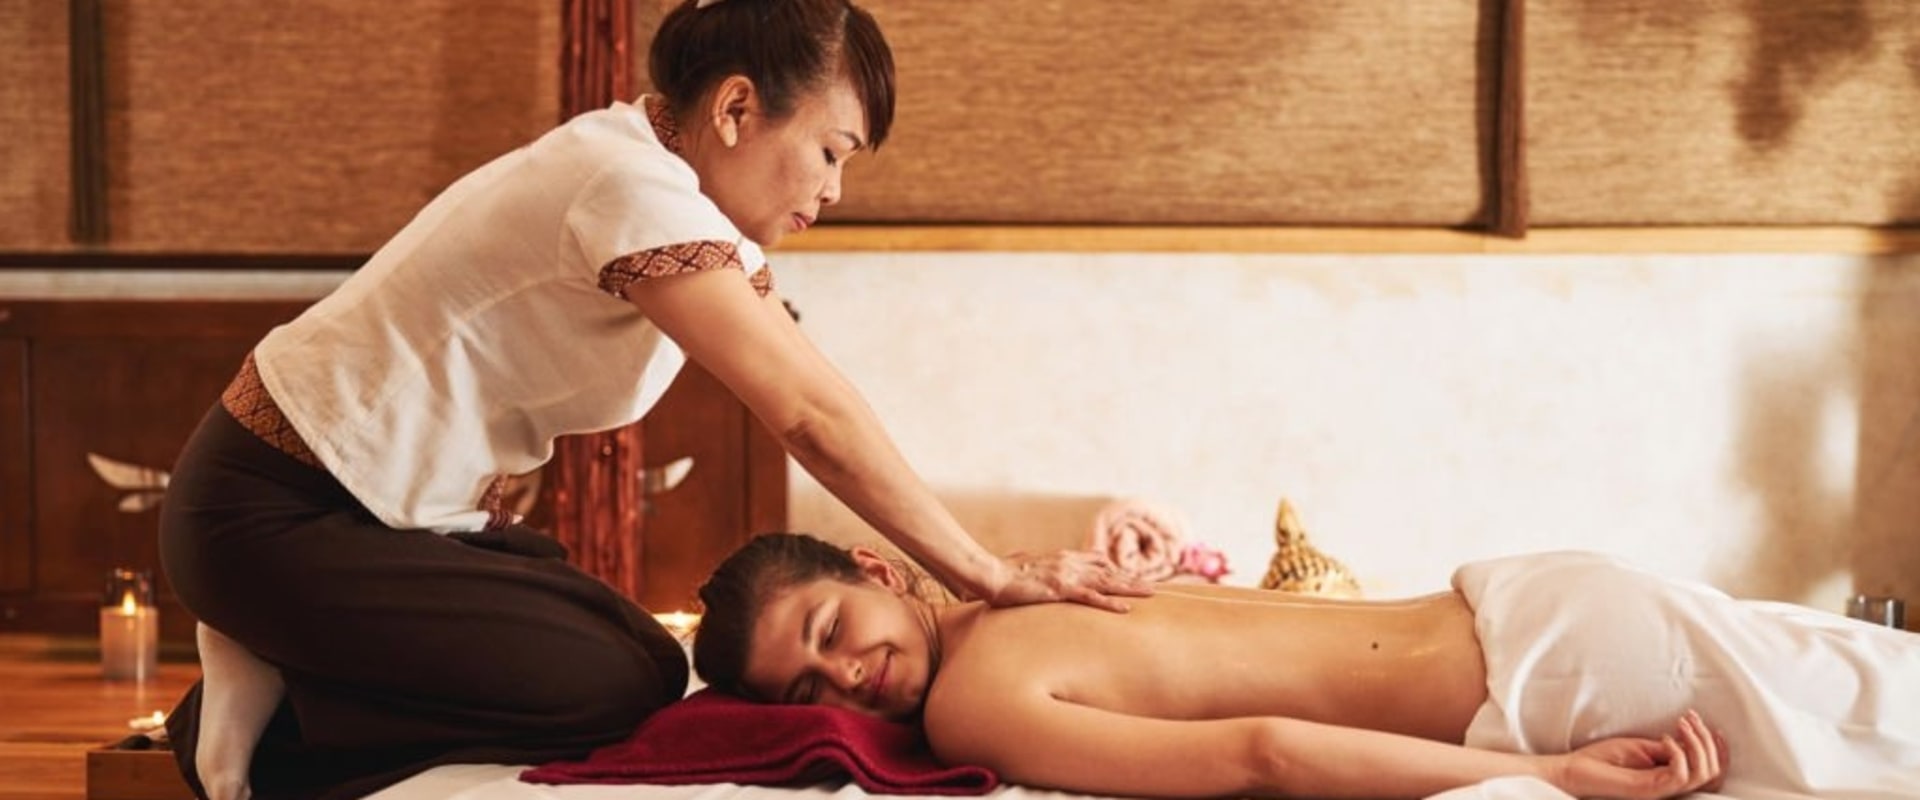 How Often Should You Get a Massage for Optimal Health Benefits?